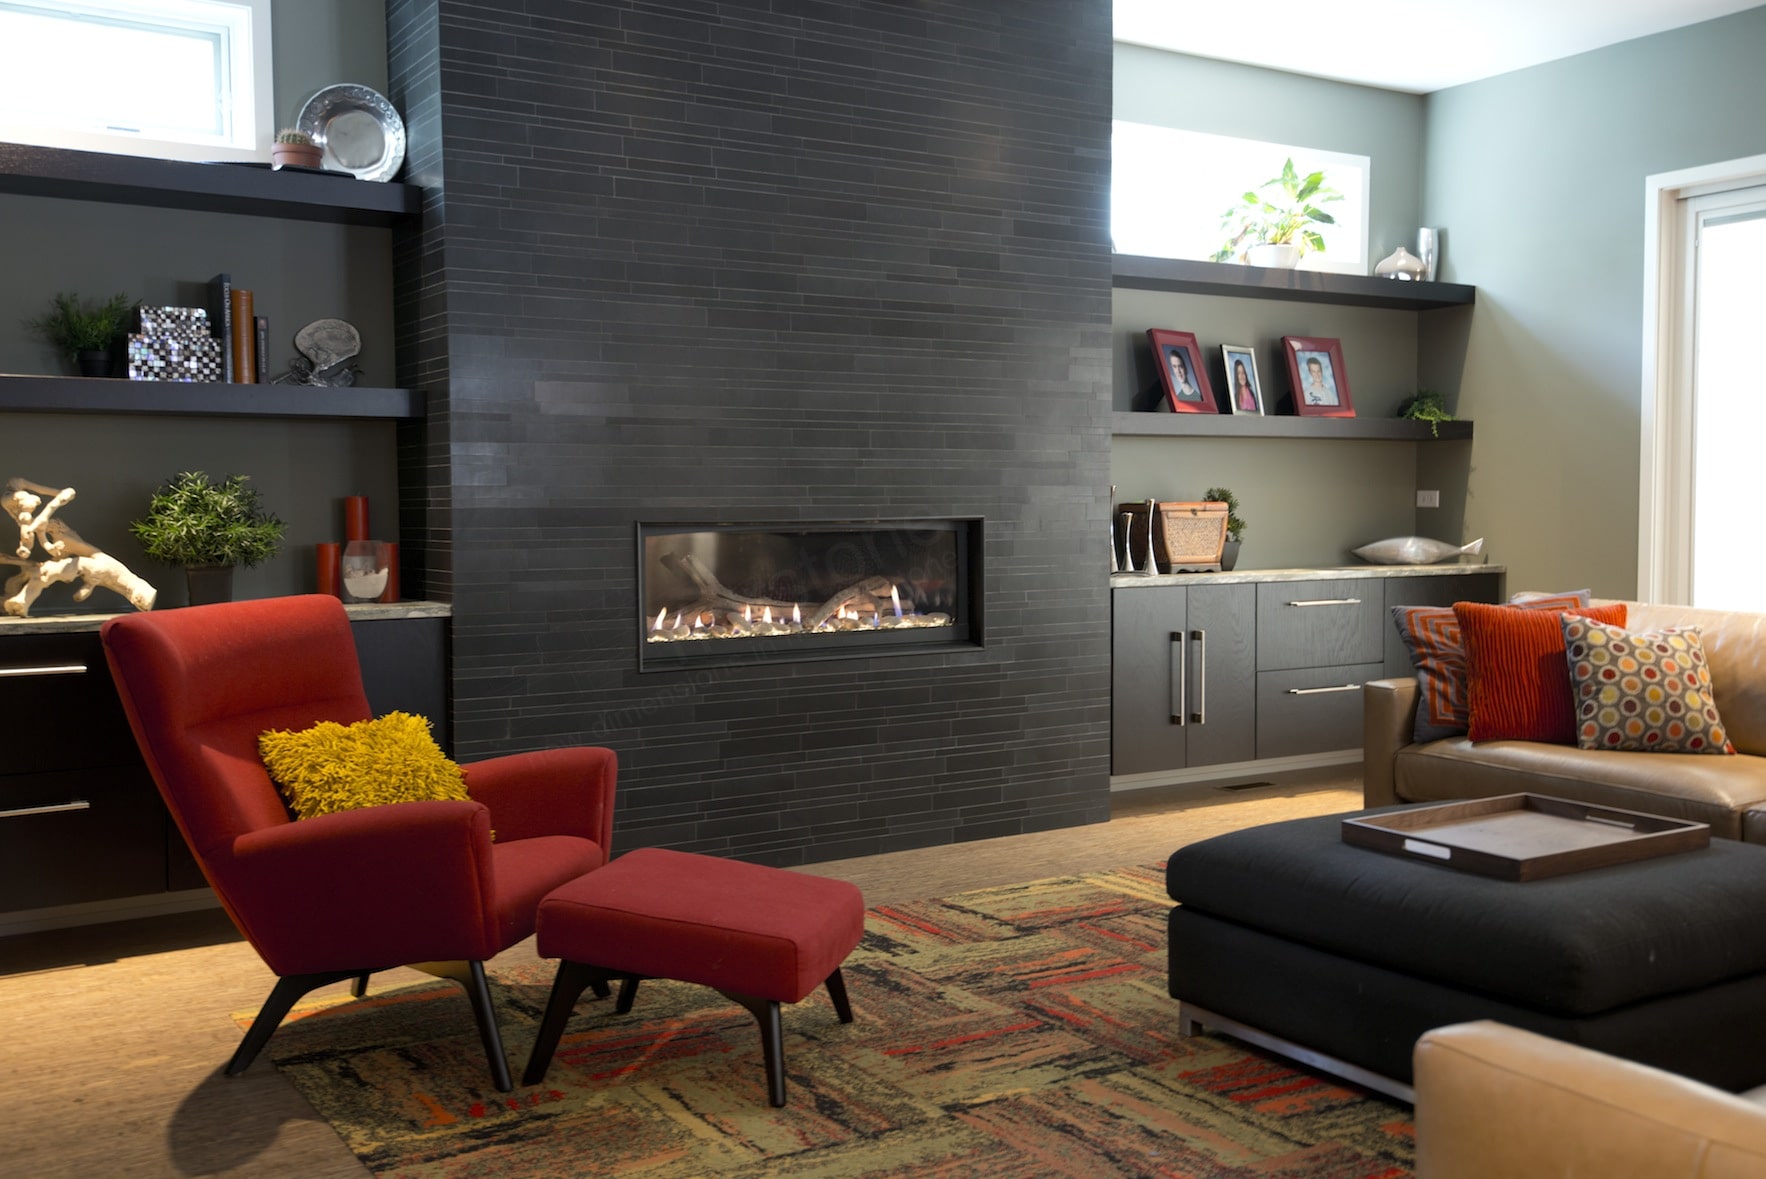 Norstone Natural Stone Veneer Ebony Lynia Interlocking Tile used on a modern fireplace with a contrasting colored red chair